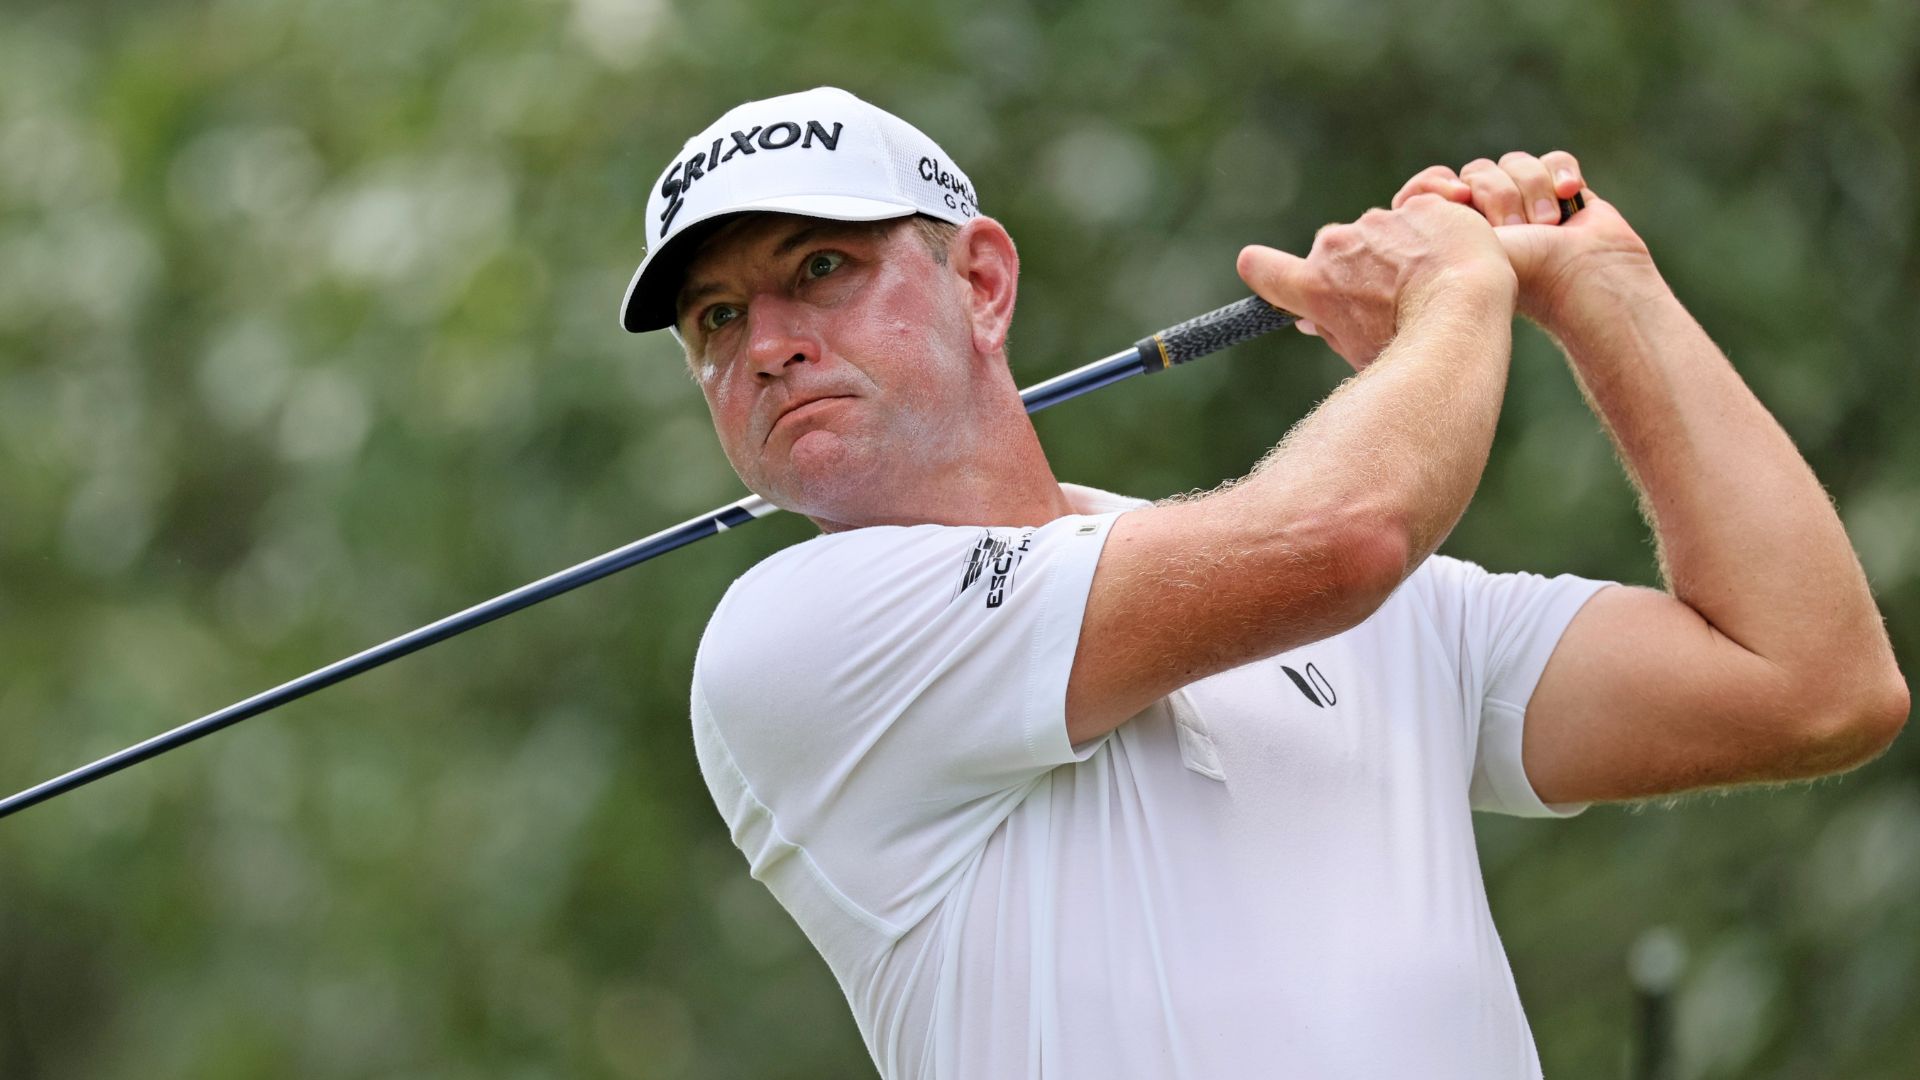 Lucas Glover keeps up heater, leads sweltering FedEx St. Jude Championship